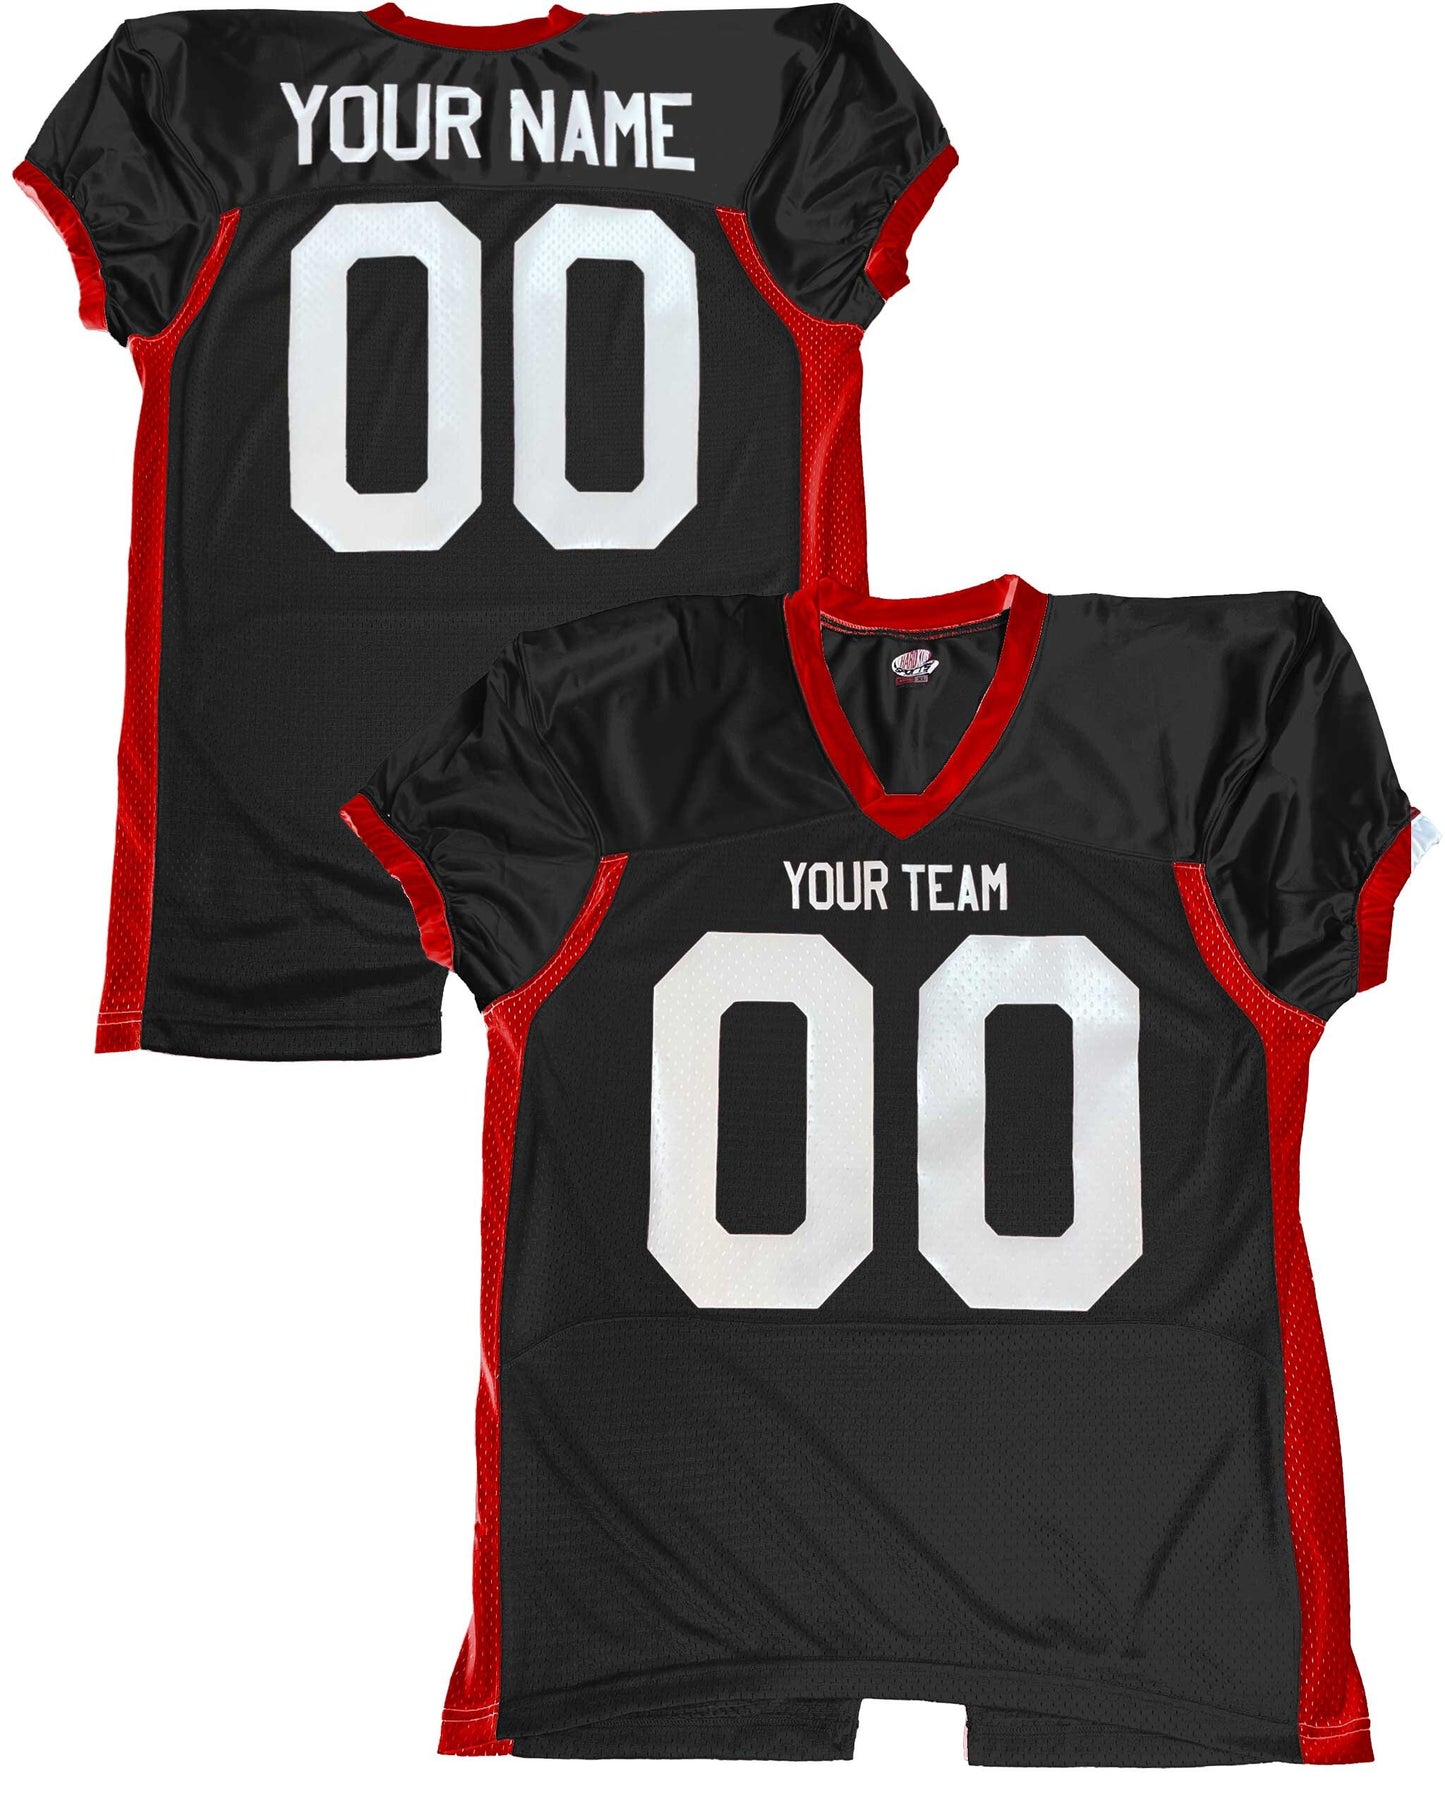 Fitted Professional Custom Color Football Jersey, Scarlet, Black, White & Gold, Stretch Mesh, Dazzle, Spandex, Customized for your team